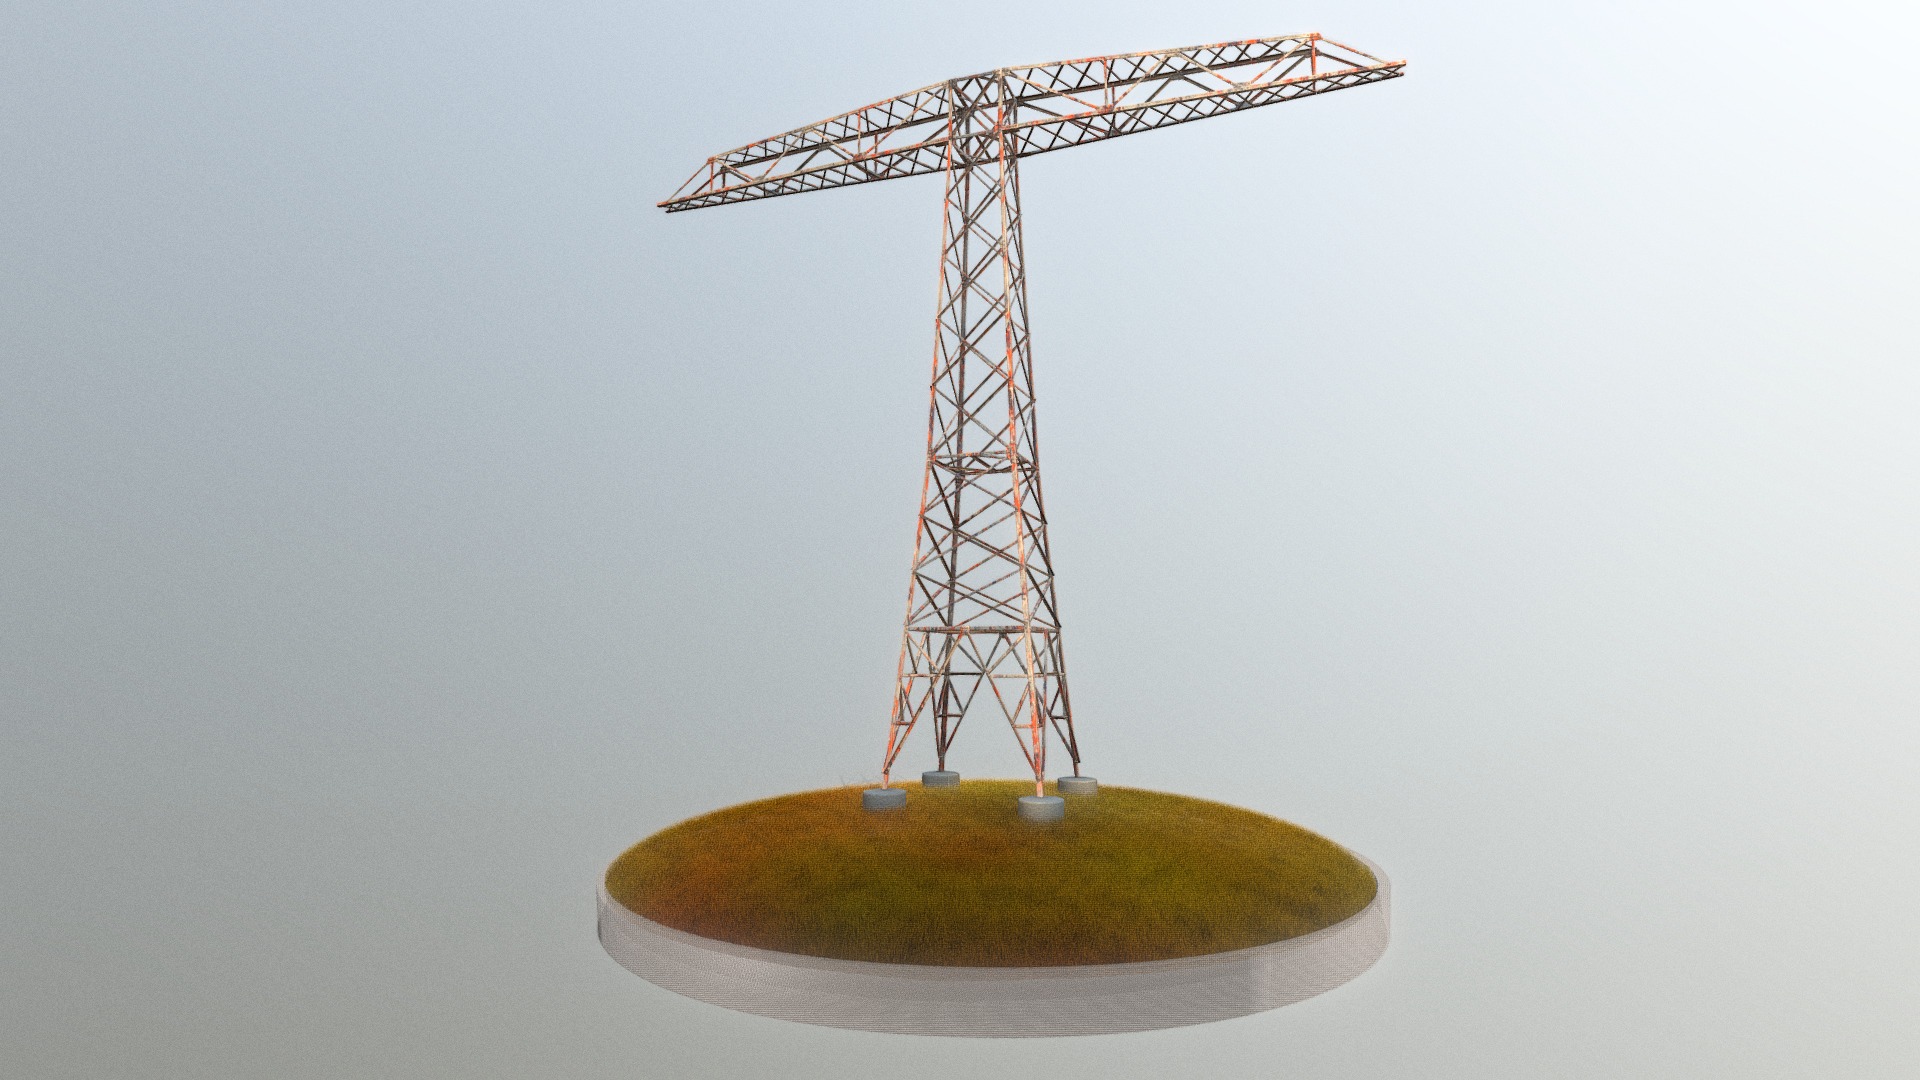 3D model Transmission Tower 18.5 Meter (Rusty Version) - This is a 3D model of the Transmission Tower 18.5 Meter (Rusty Version). The 3D model is about a gold and red tower.